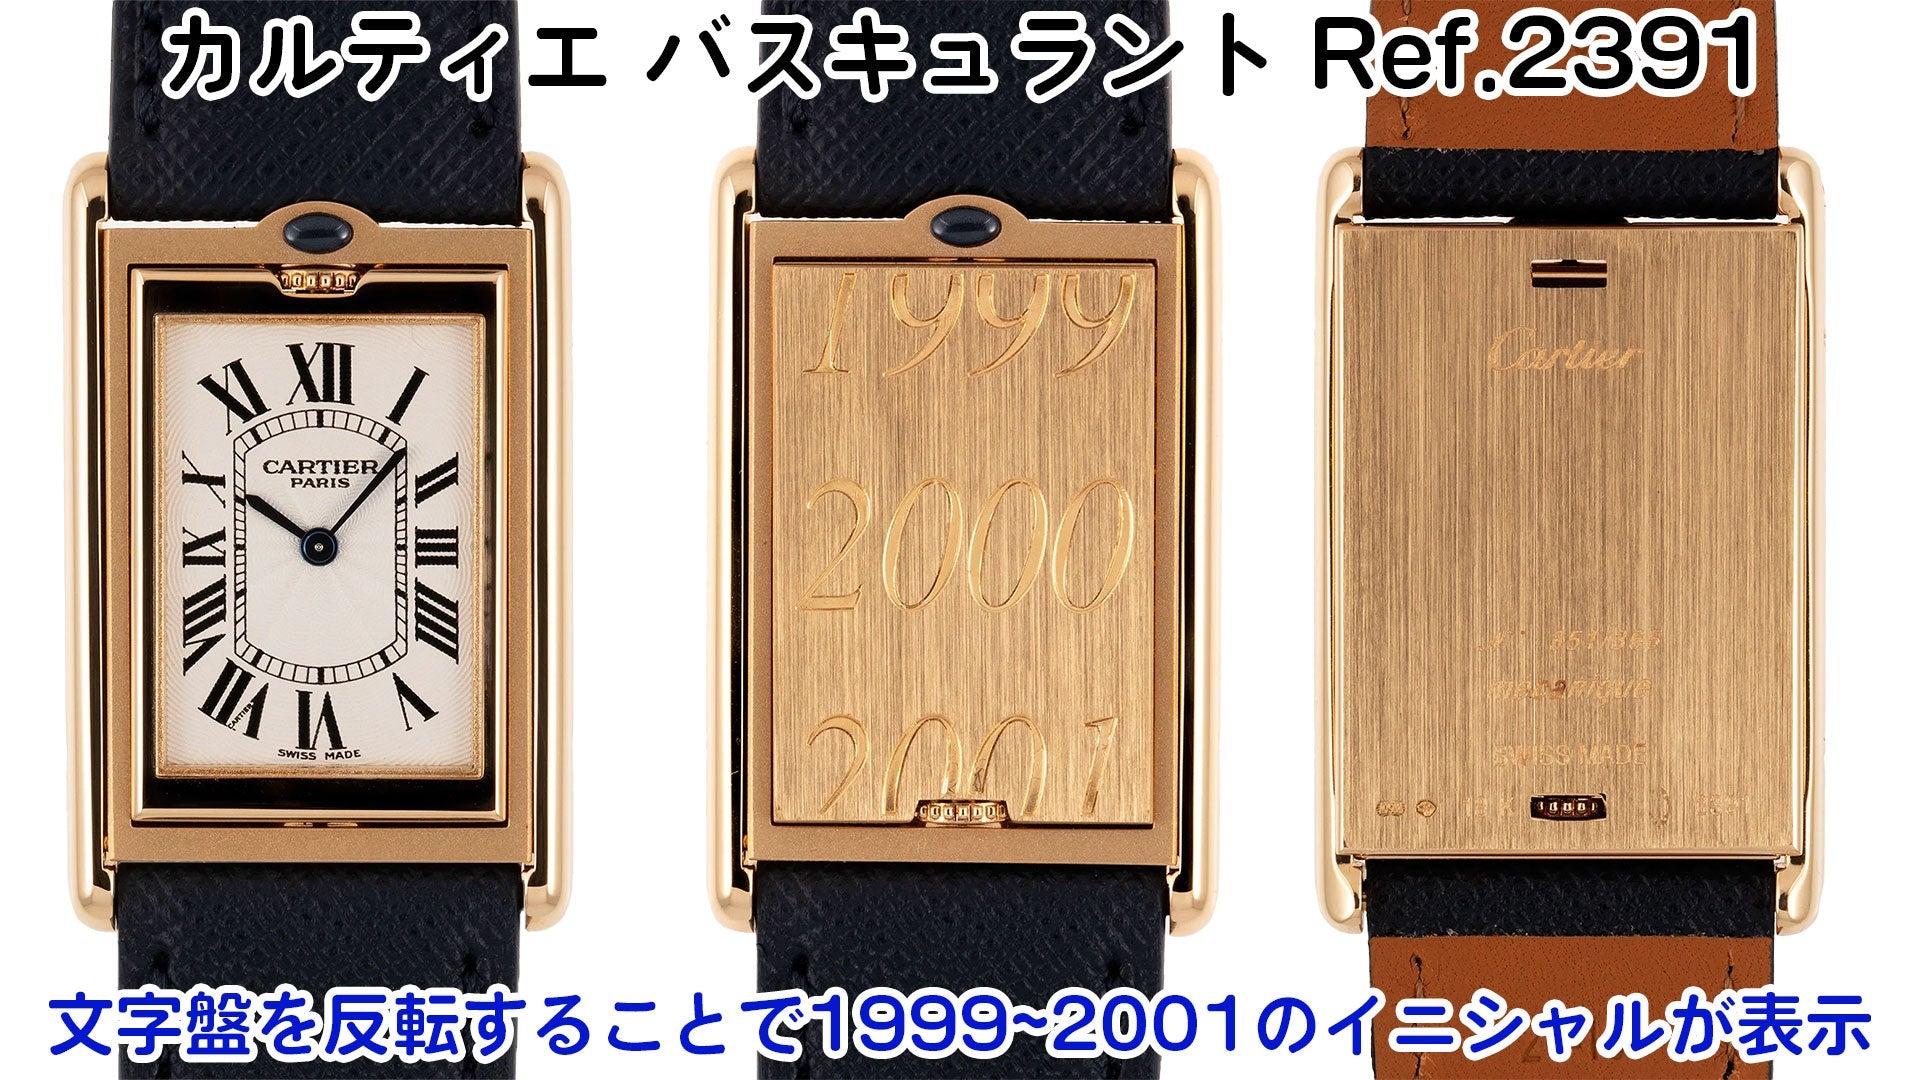 Cartier Watch CPCP Collection Basculant Ref.2391